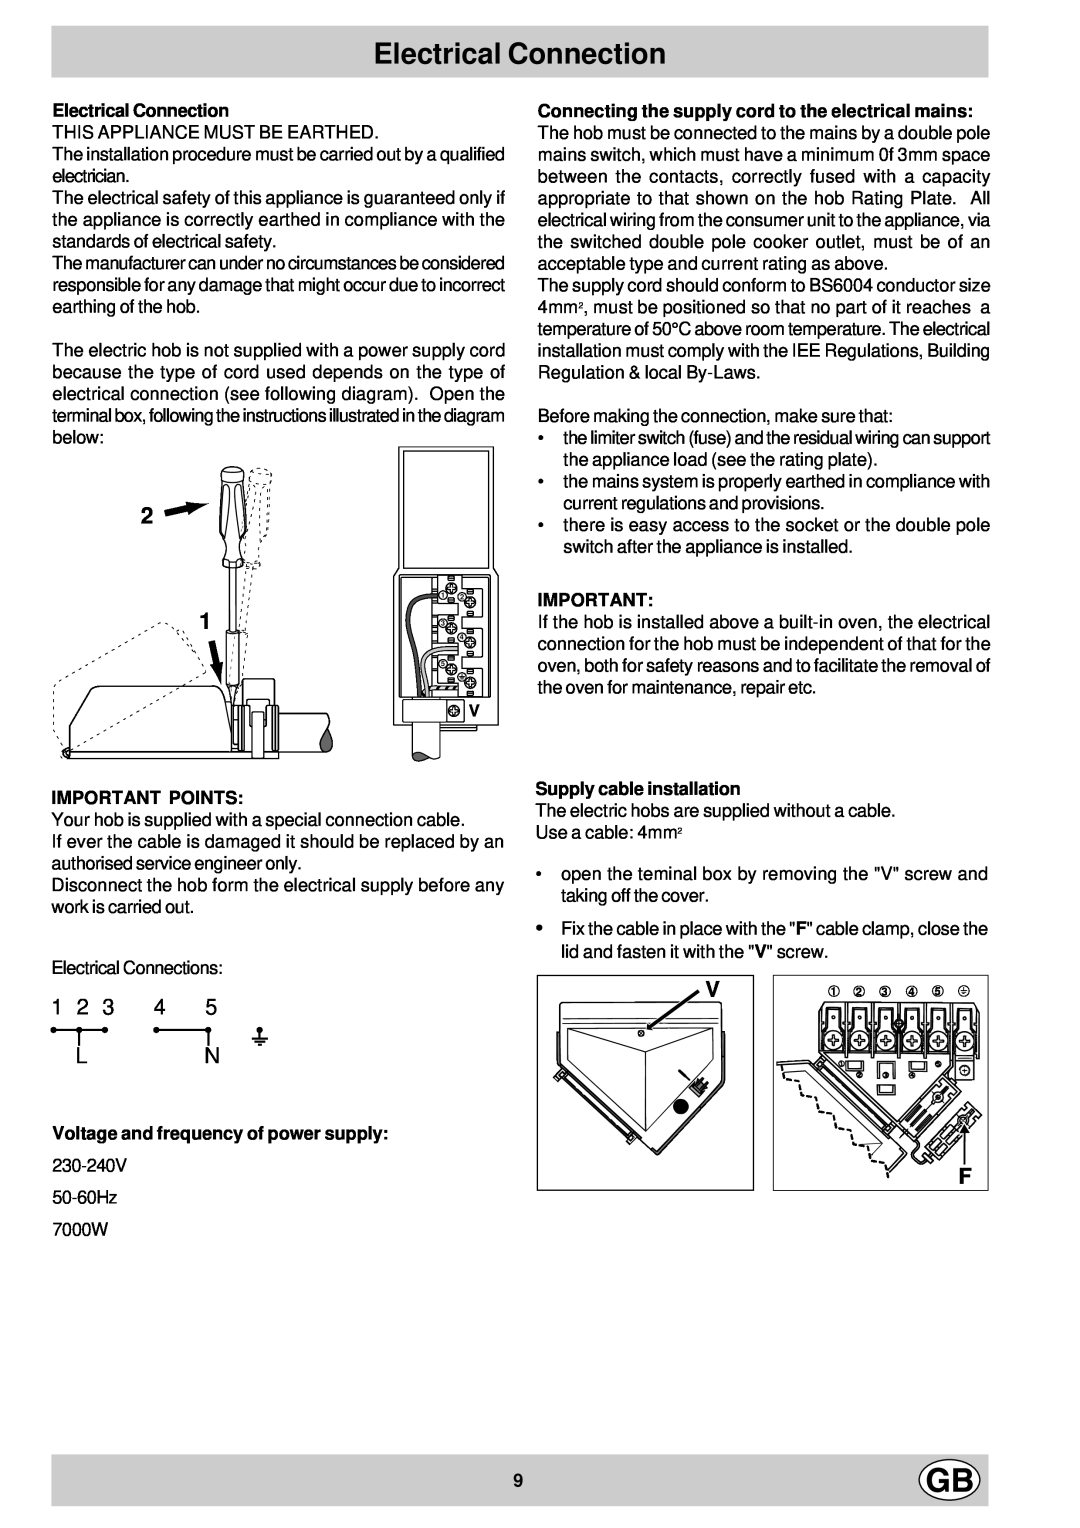 Hotpoint EC604 Electrical Connection, Important Points, Supply cable installation, Voltage and frequency of power supply 